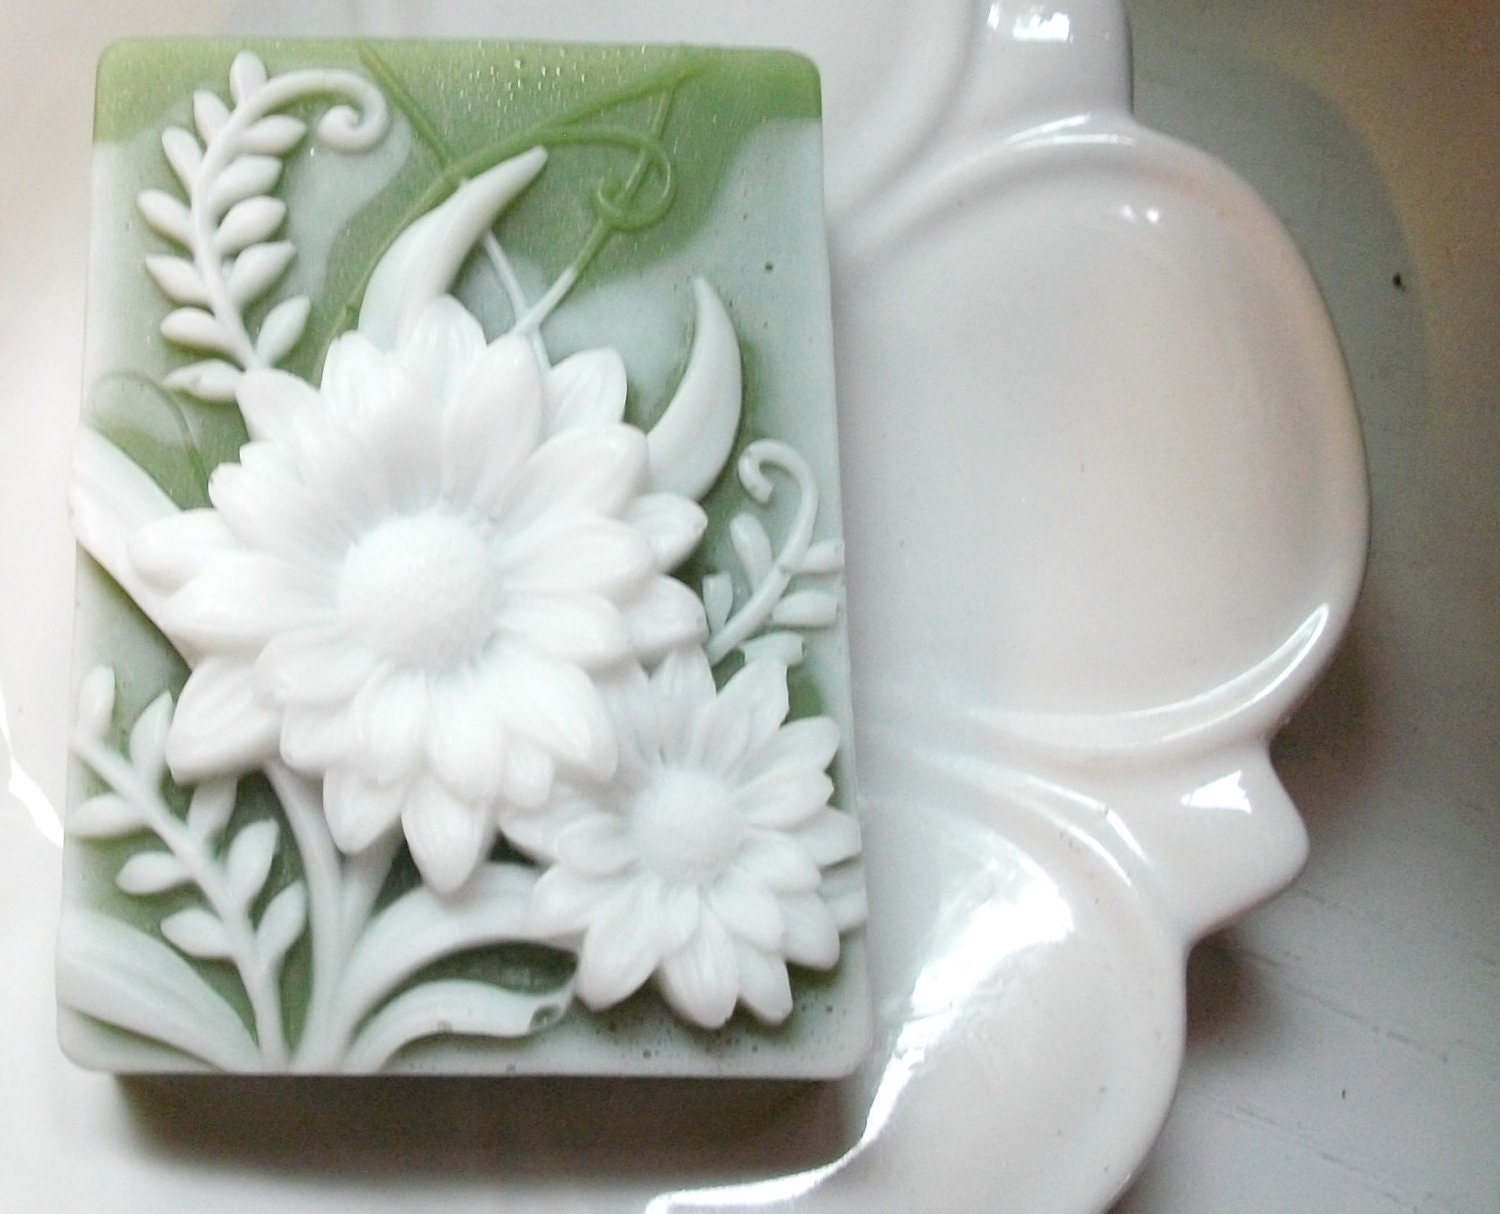 SOAP Lavender Scented Moisturizing Vegetable Based Dimensional Daisies Soap in Sage Green